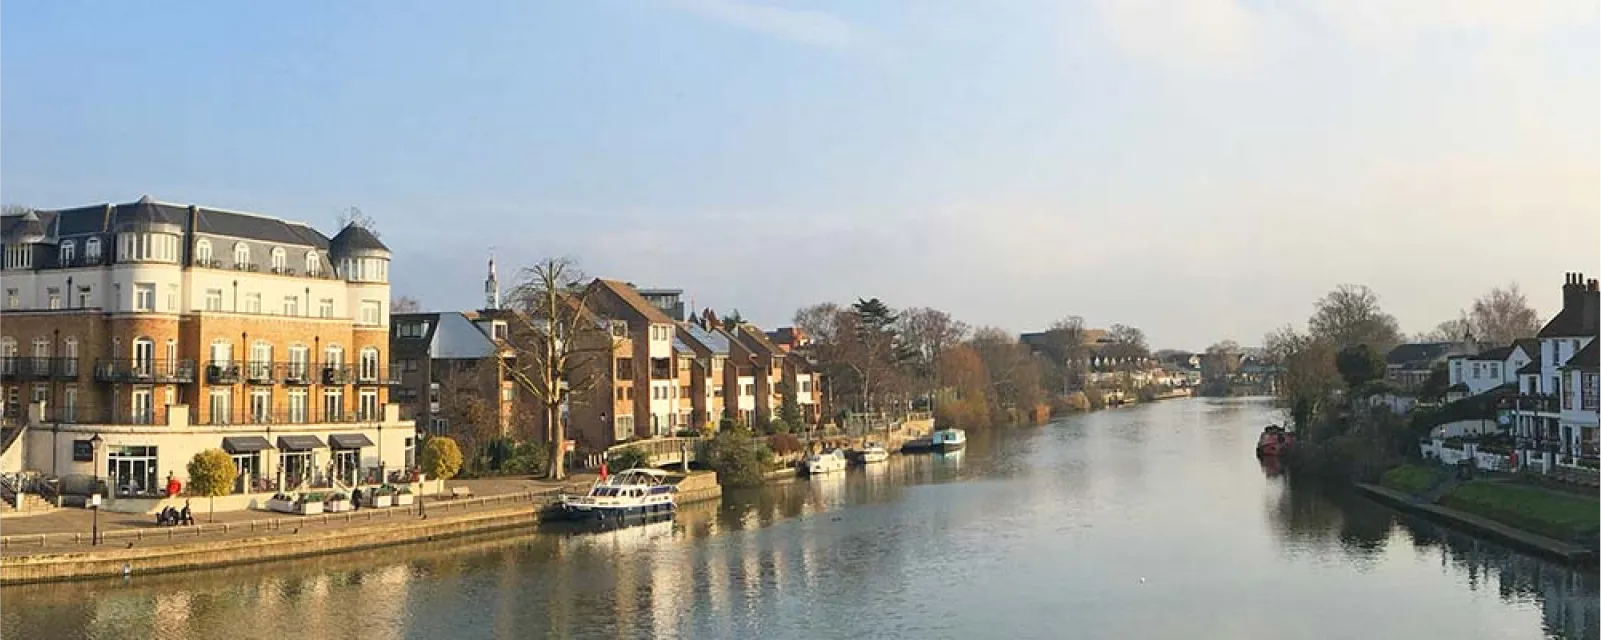 Properties for Sale in Staines
